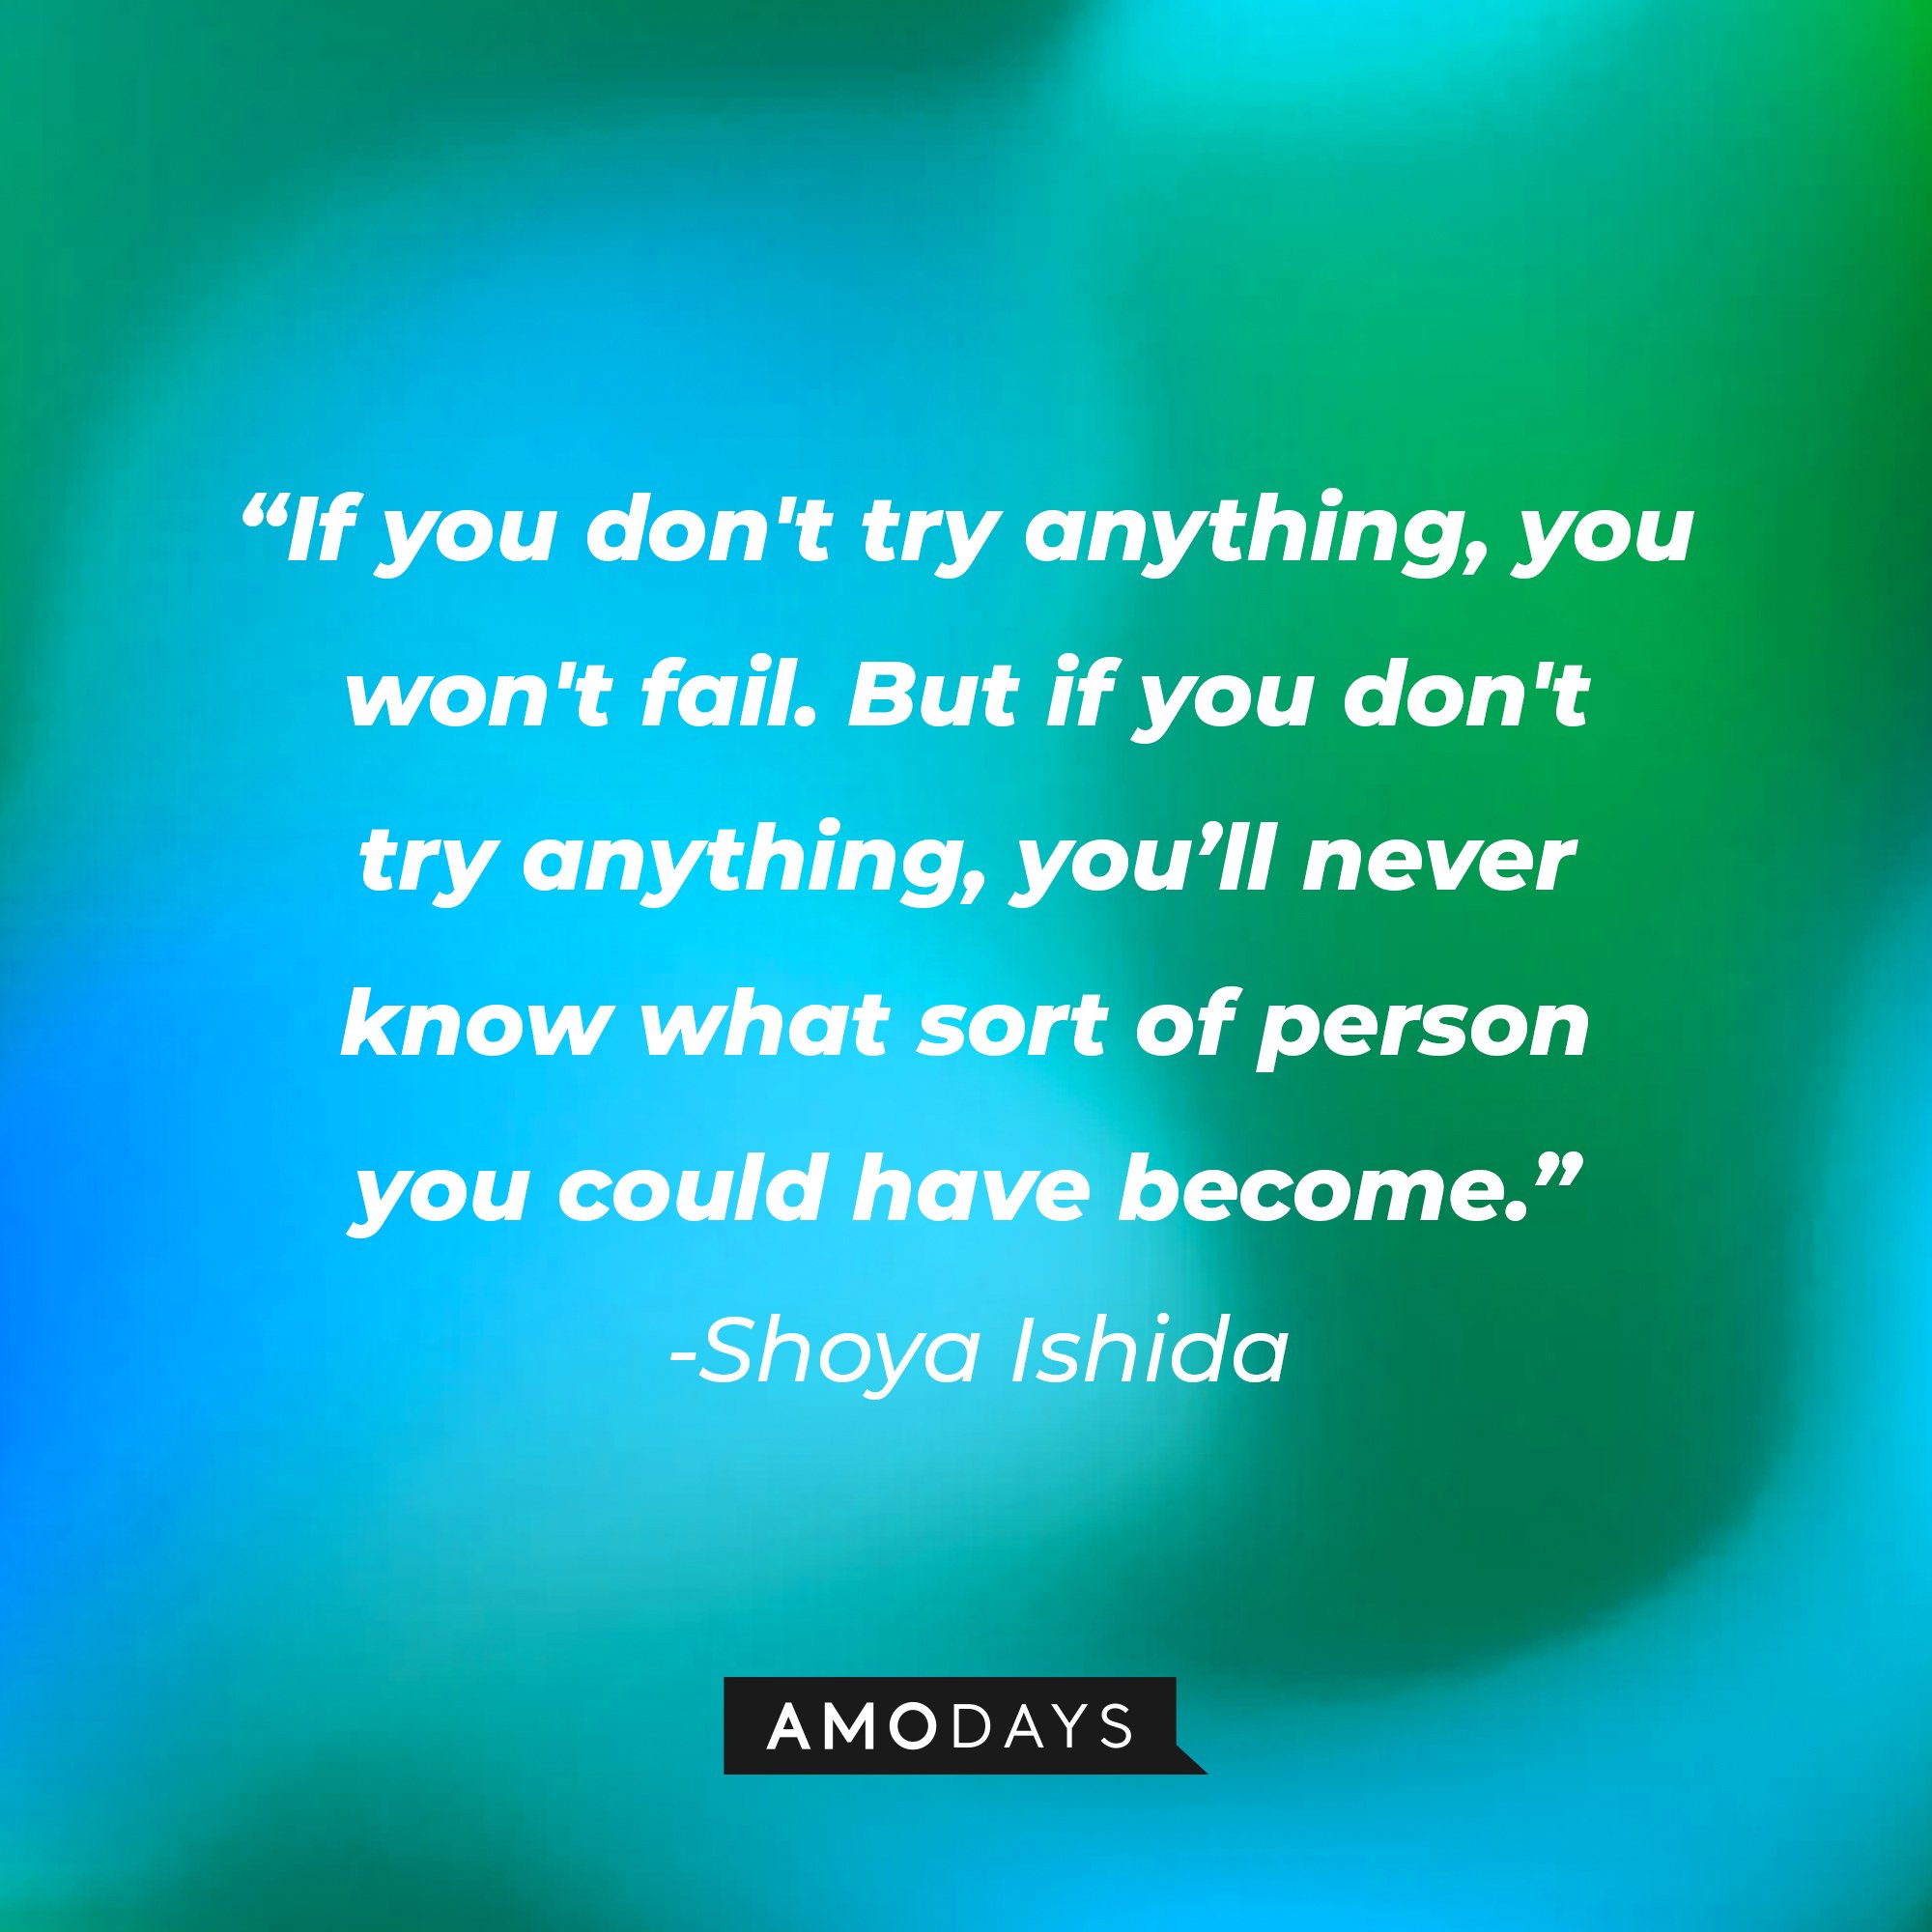 Shoya Ishida’s quote: "If you don't try anything, you won't fail. But if you don't try anything, you’ll never know what sort of person you could have become." | Image: AmoDays